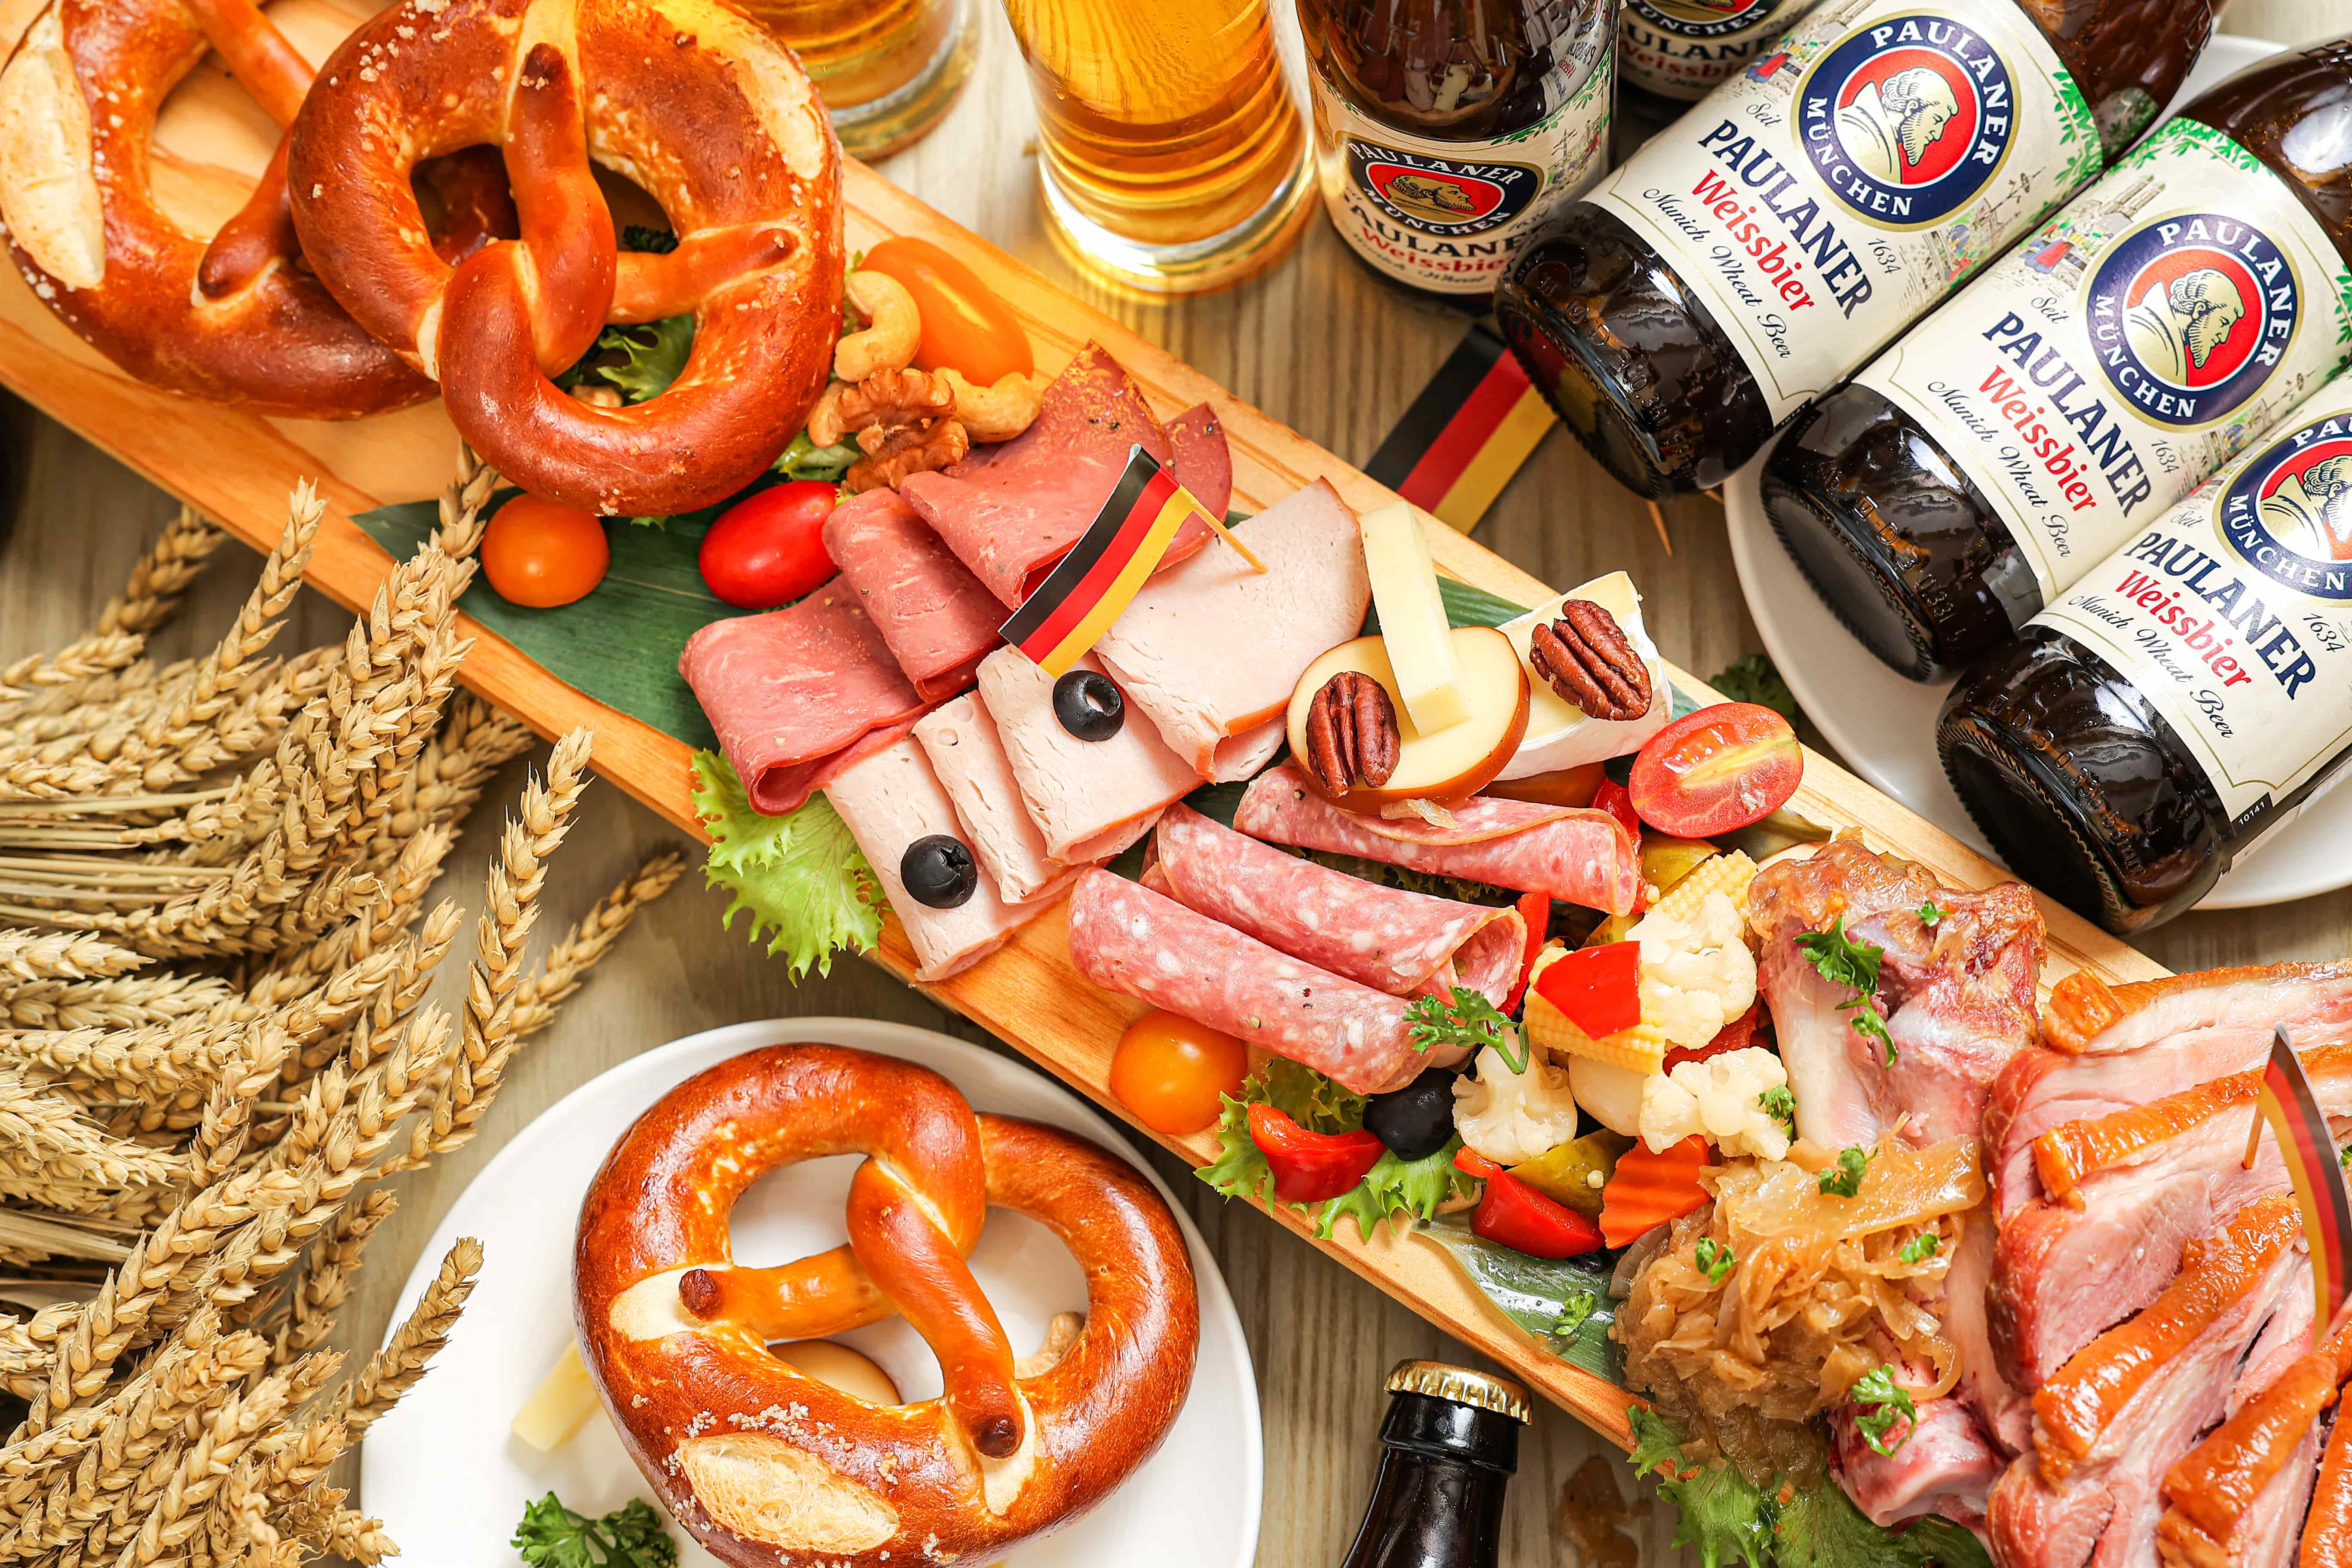 Cold Cut & Meat Sharing Platter for Four Including German Pork Knuckle, Roasted Chicken and more